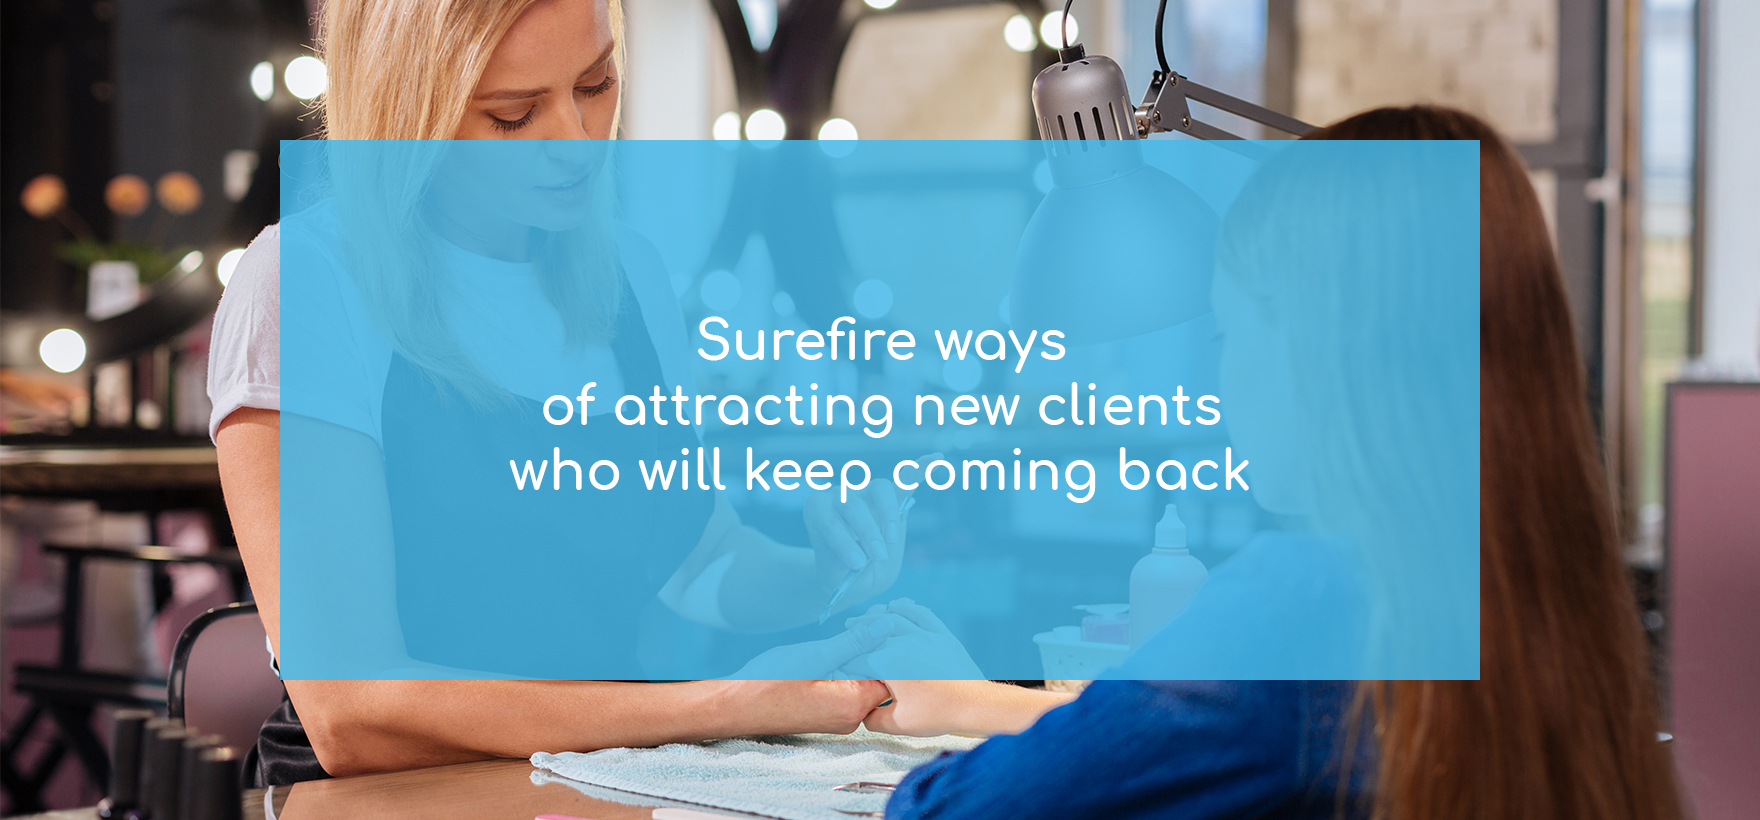 6 surefire ways of attracting new clients who will keep coming back